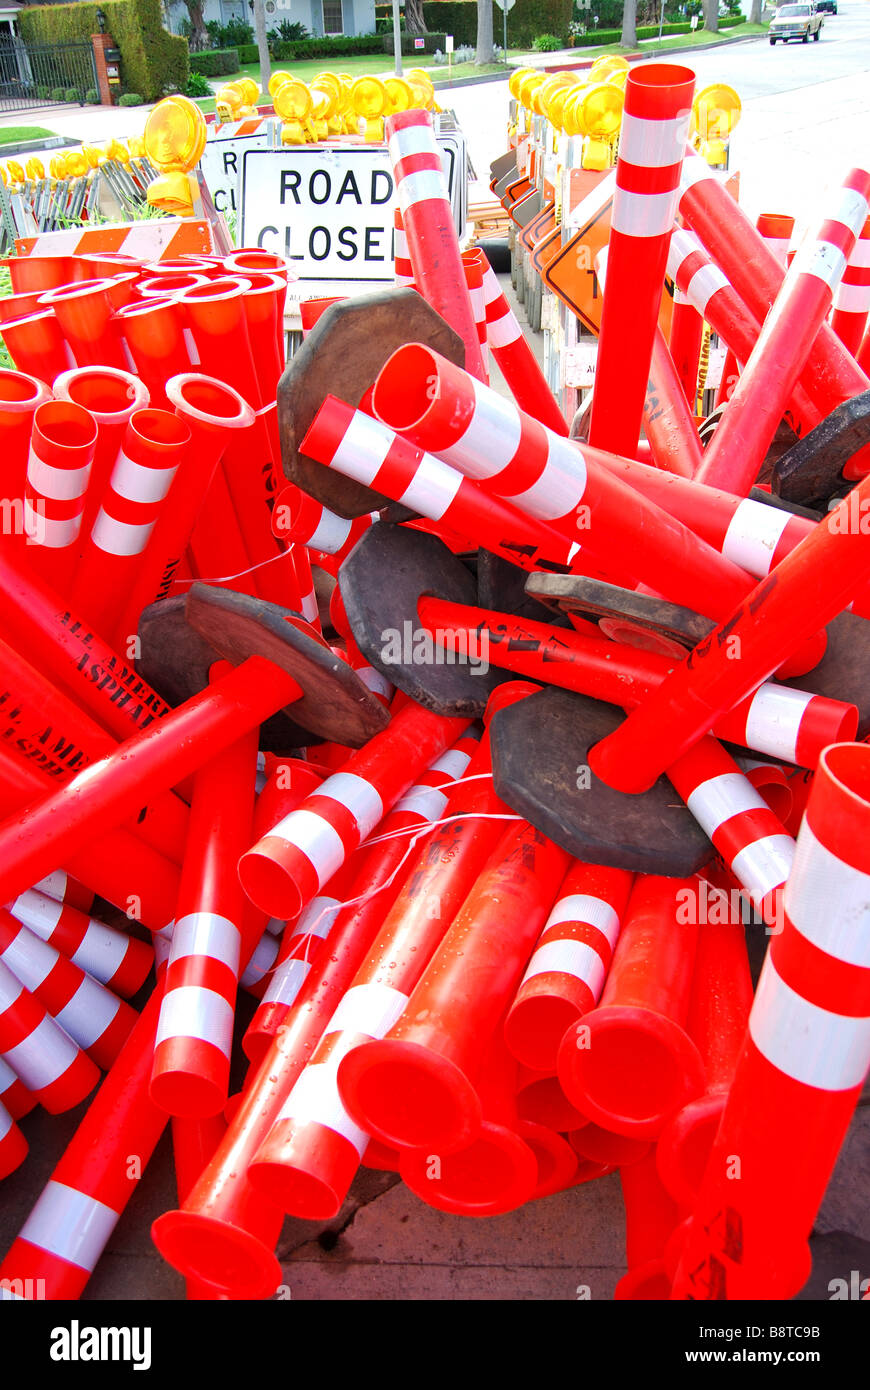 Traffic signs and cones, Beverly Hills, Los Angeles, California, United States of America Stock Photo